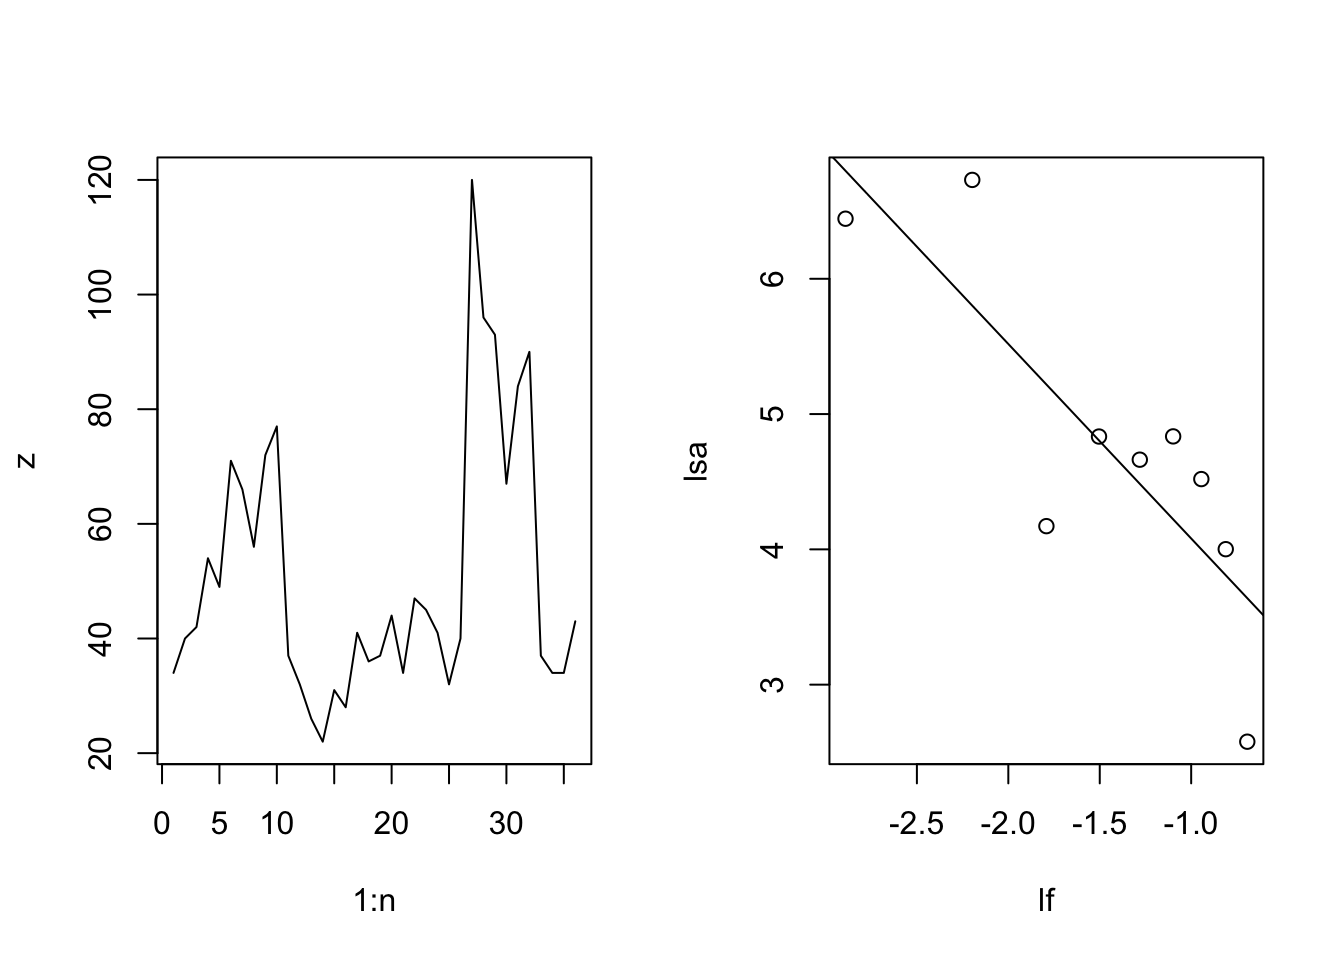 Sparrow population dynamics seems to show reddened flutuations. On the left, sparrow counts over time, and on the right, the log-log plot of the power spectrum (power vs. frequency). The frequentist confidence interval on the slope of the fitted line suggests that we shouldn't rule out the possibility of a reddened series.